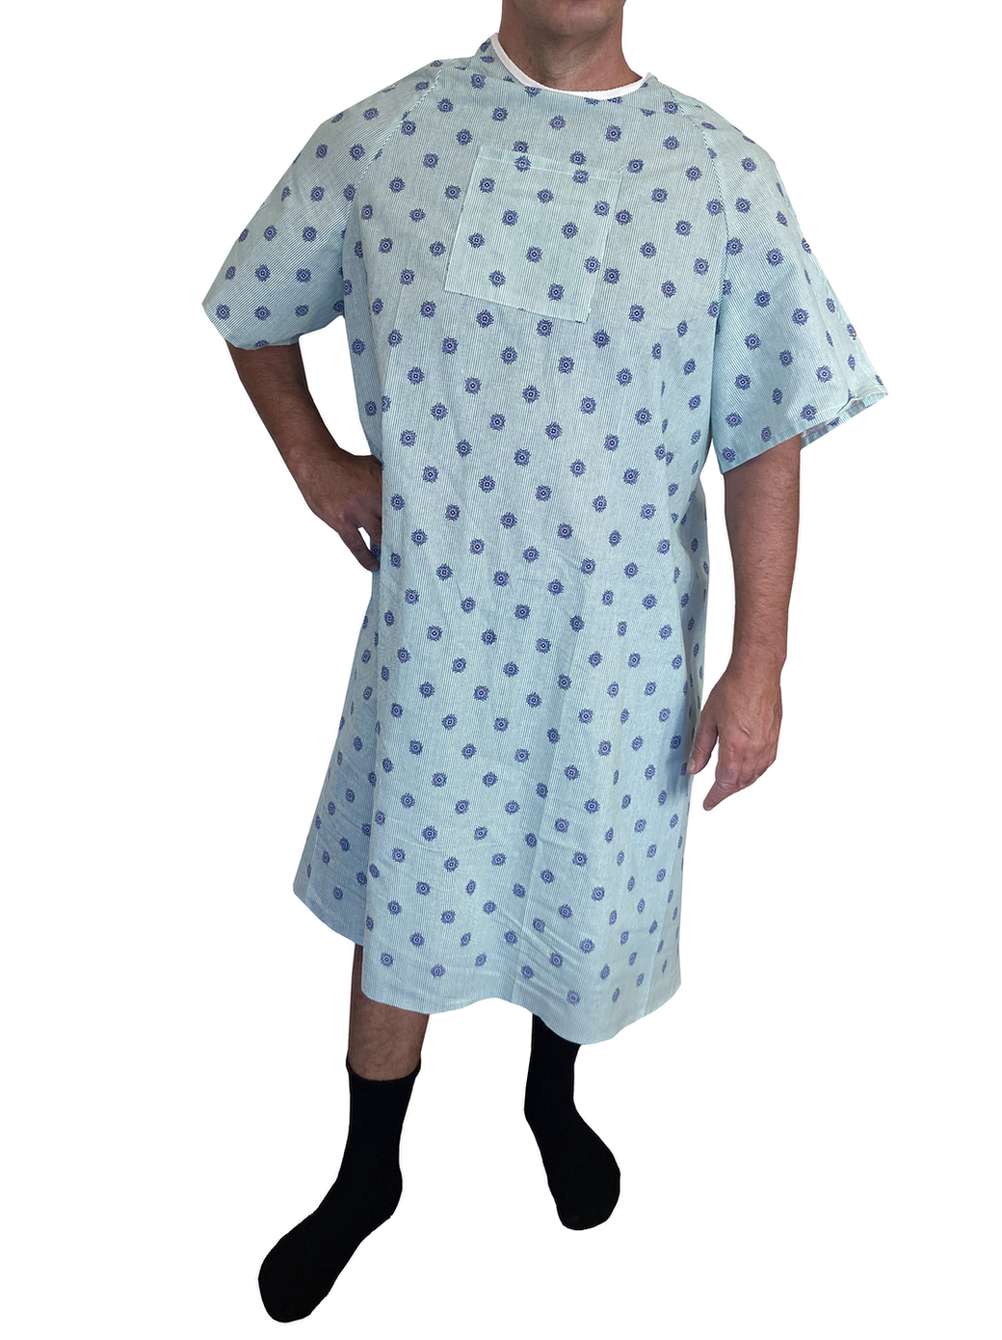 12 Pack Blue Hospital Gown with Back Tie/Hospital Patient Robes with Ties |  eBay